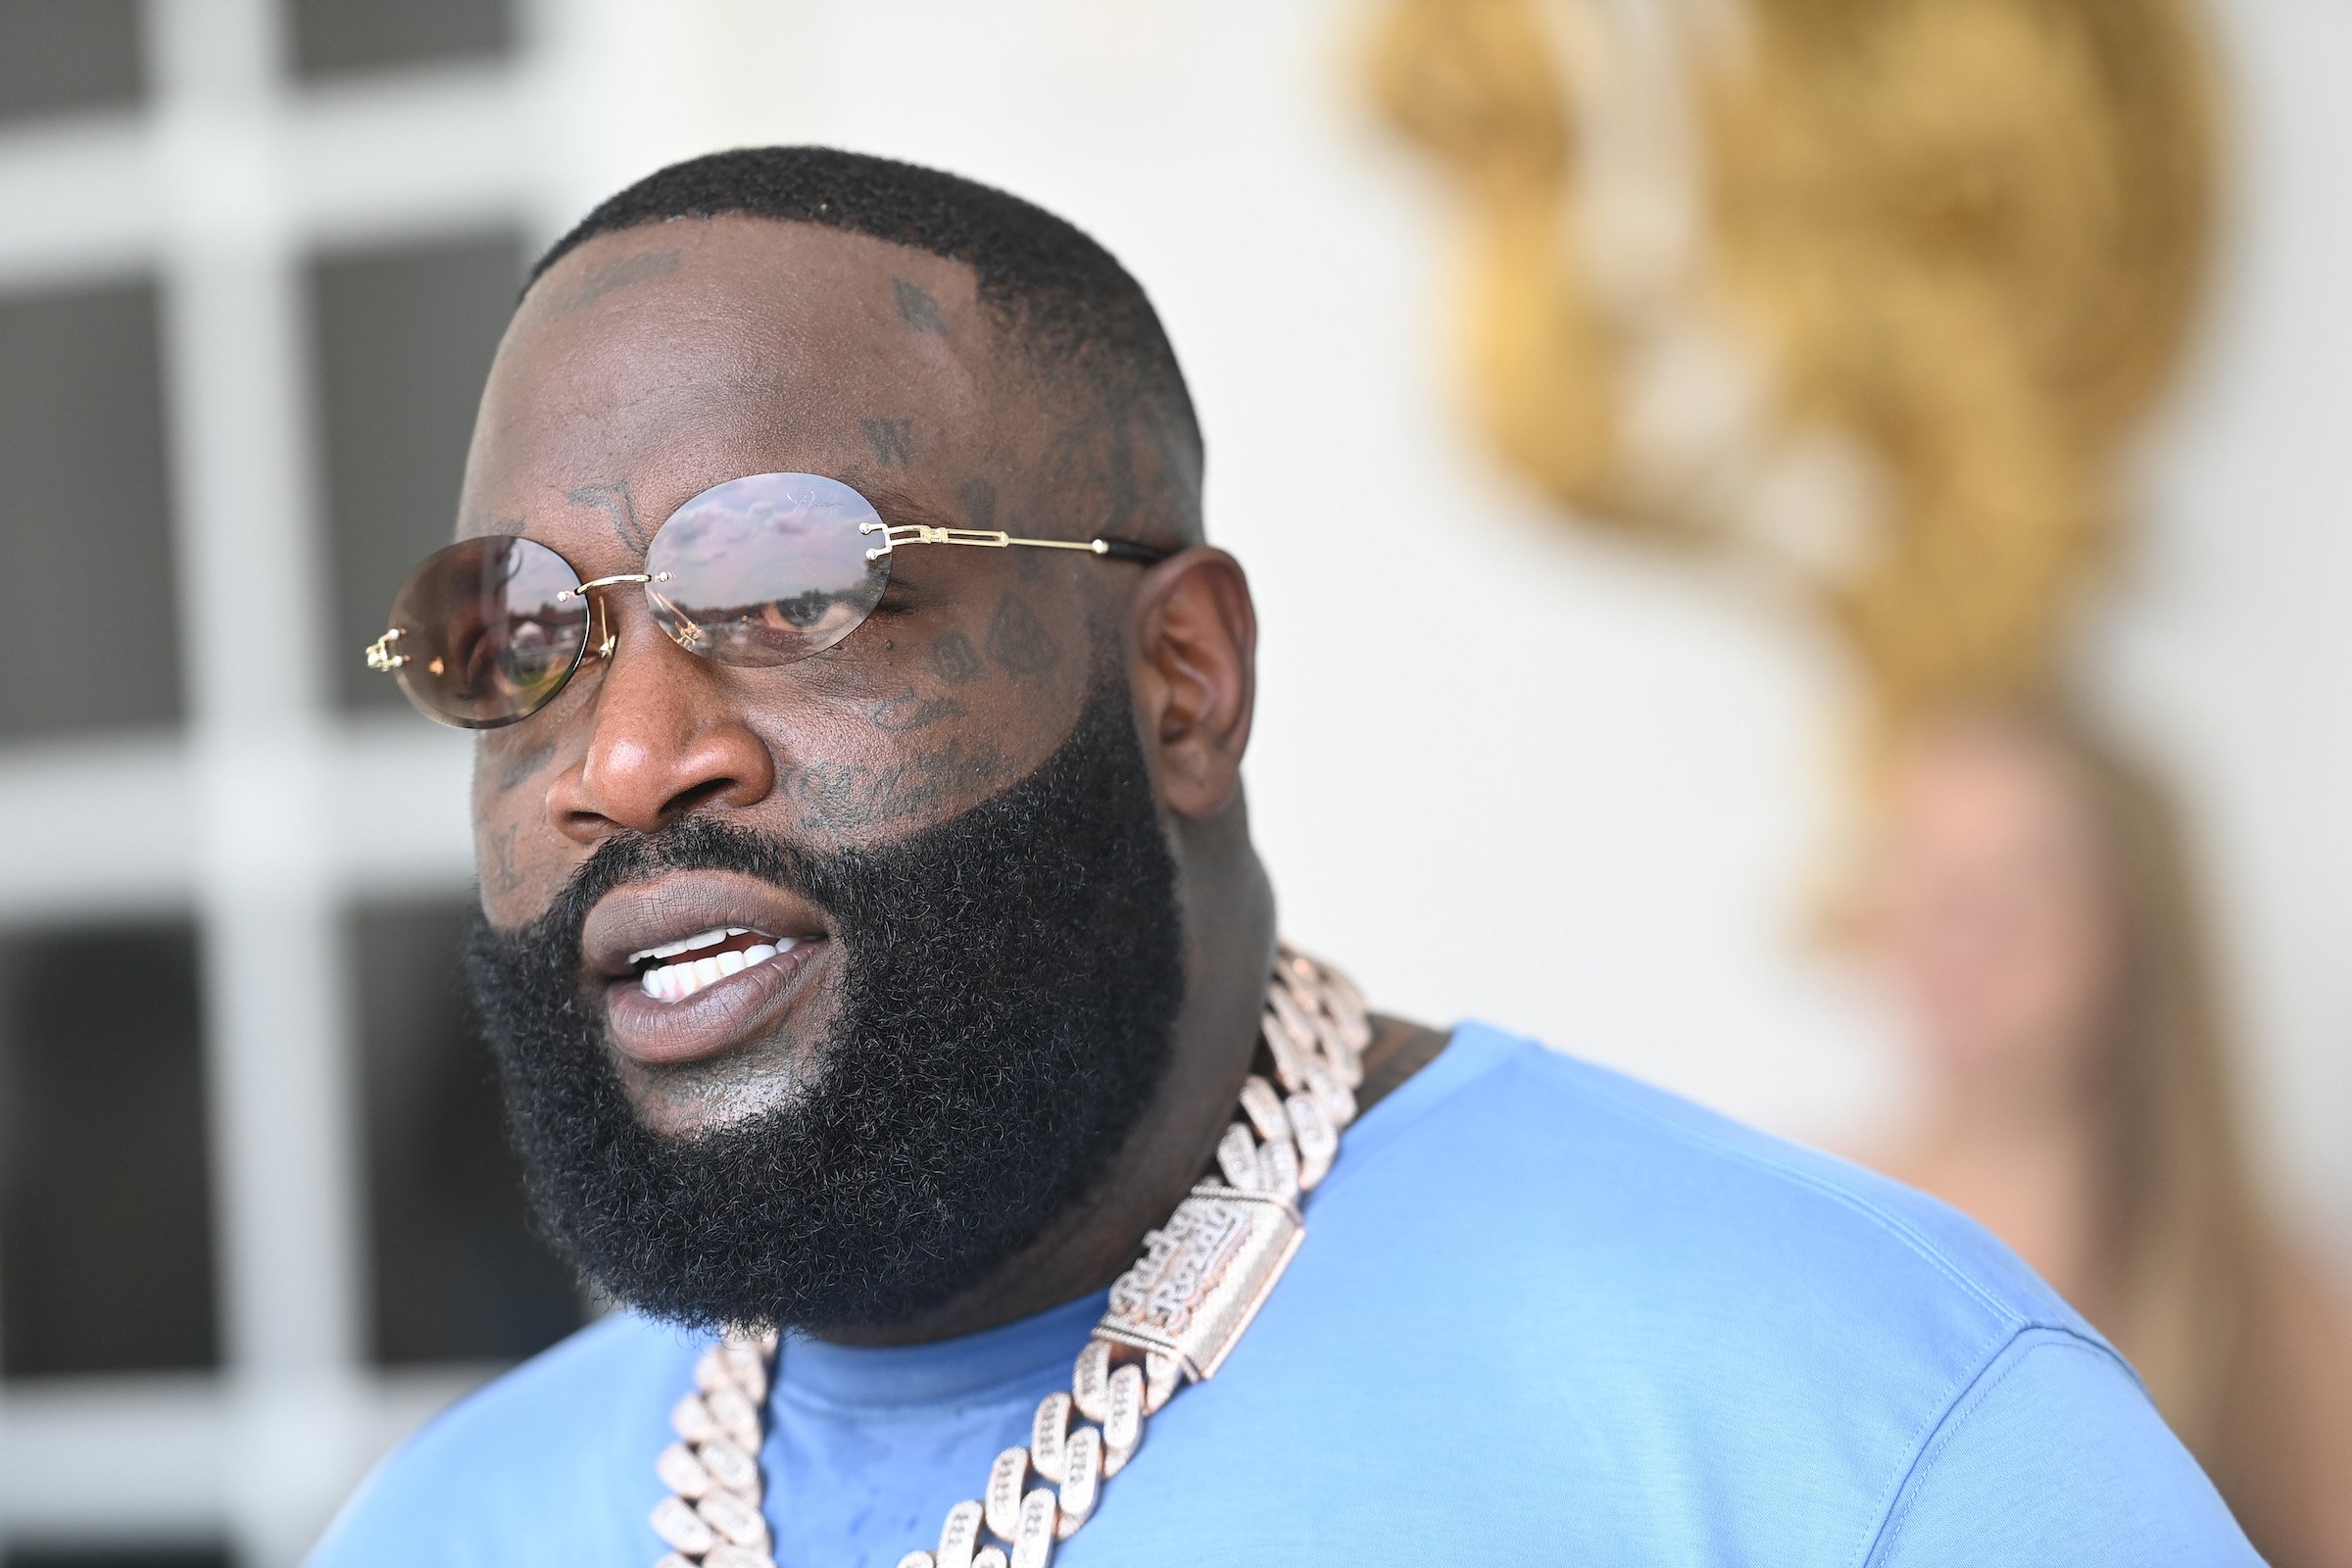 Rick Ross wearing a blue shirt and chain